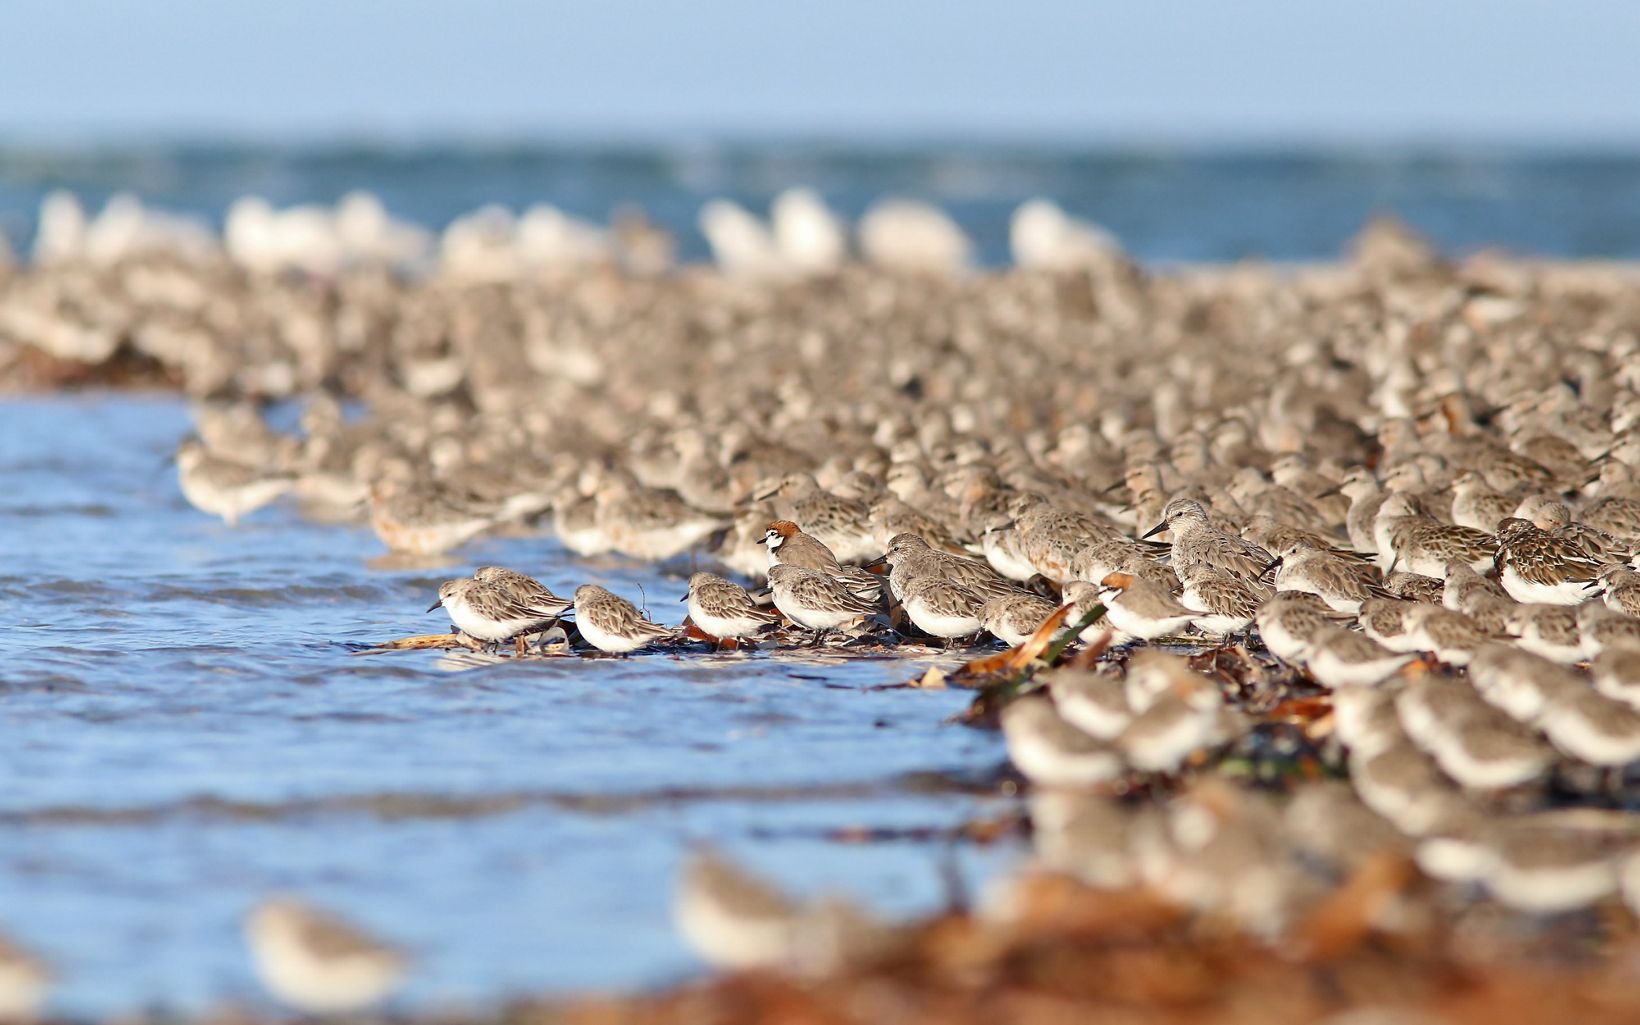 Red Knot birds in the Adelaide International Bird Sanctuary